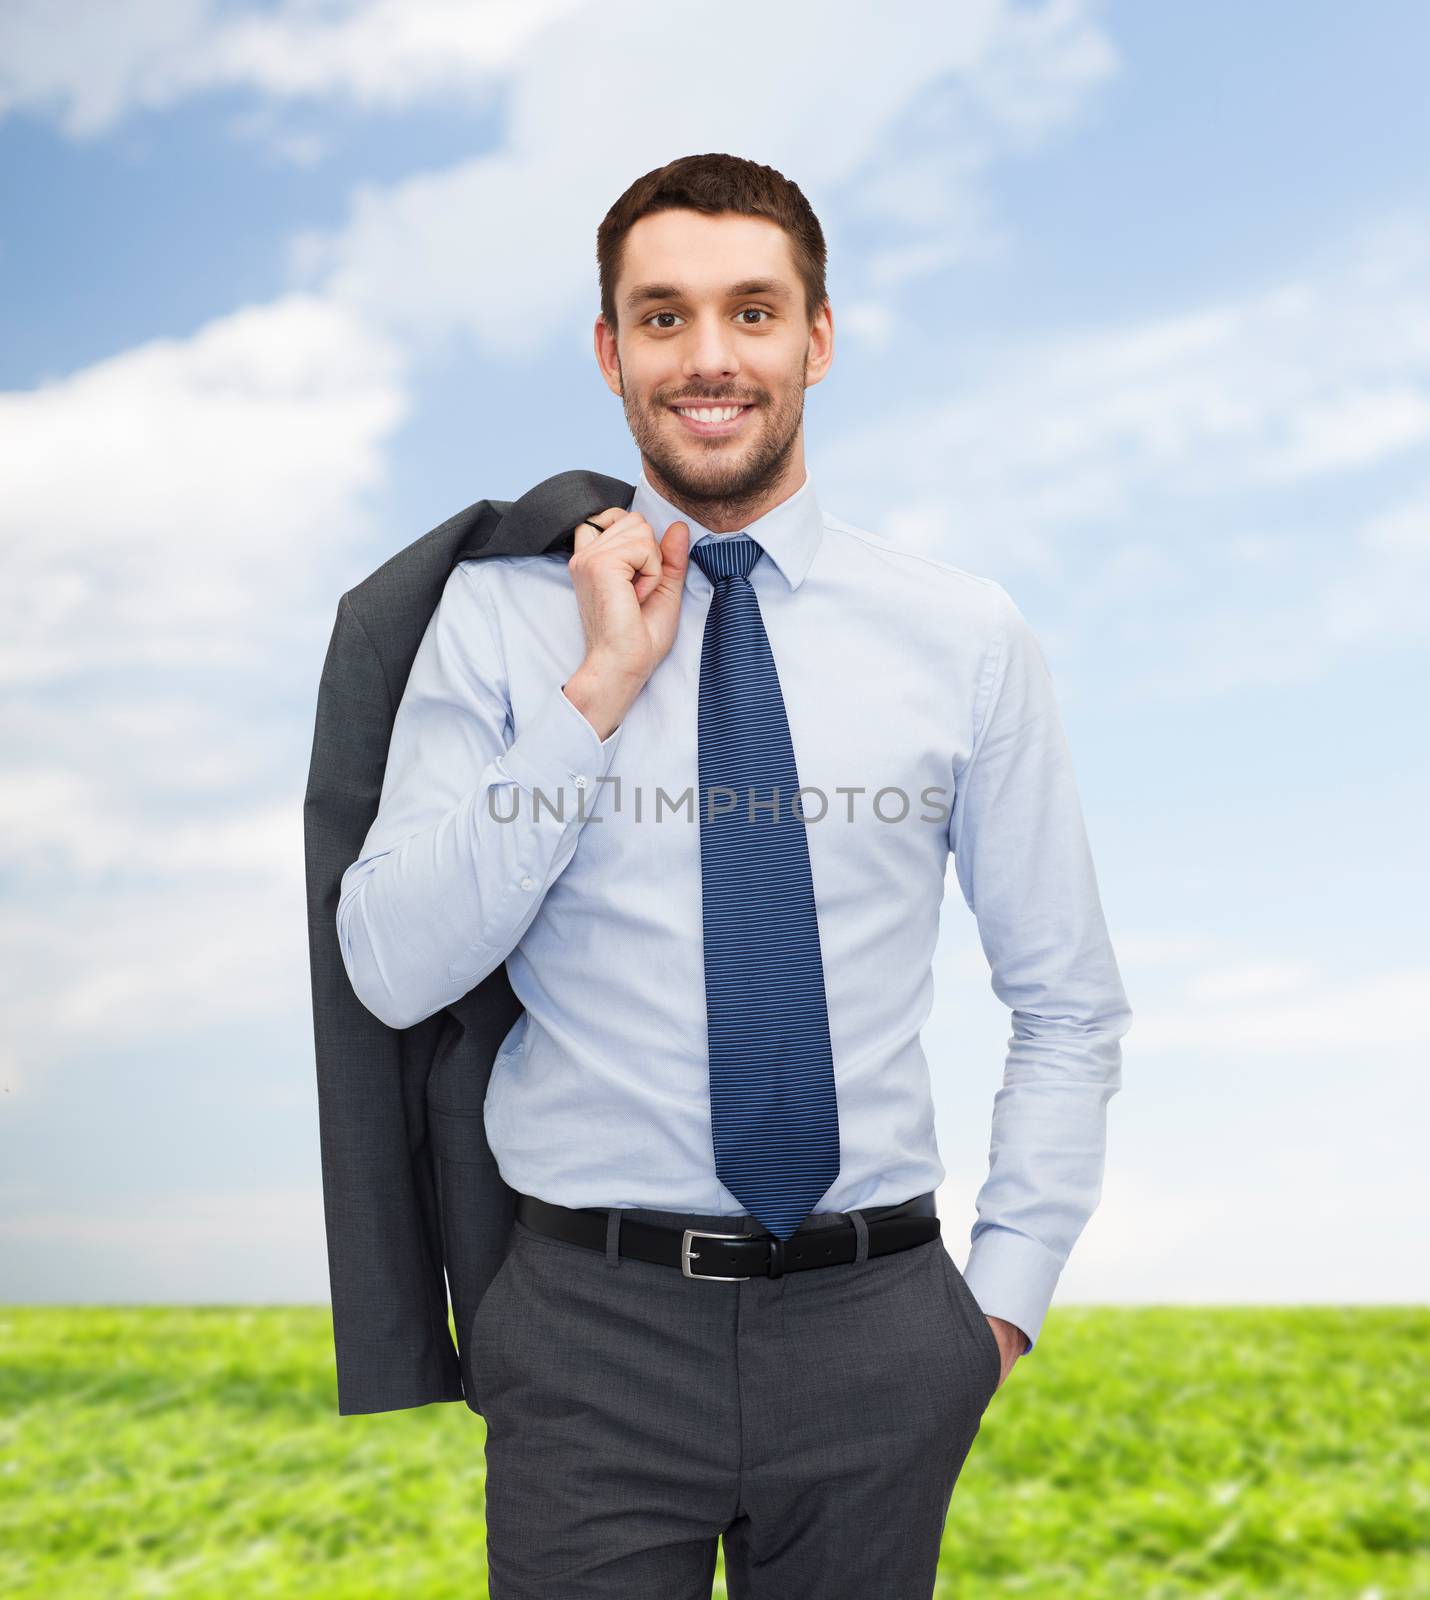 business and people concept - smiling young and handsome businessman